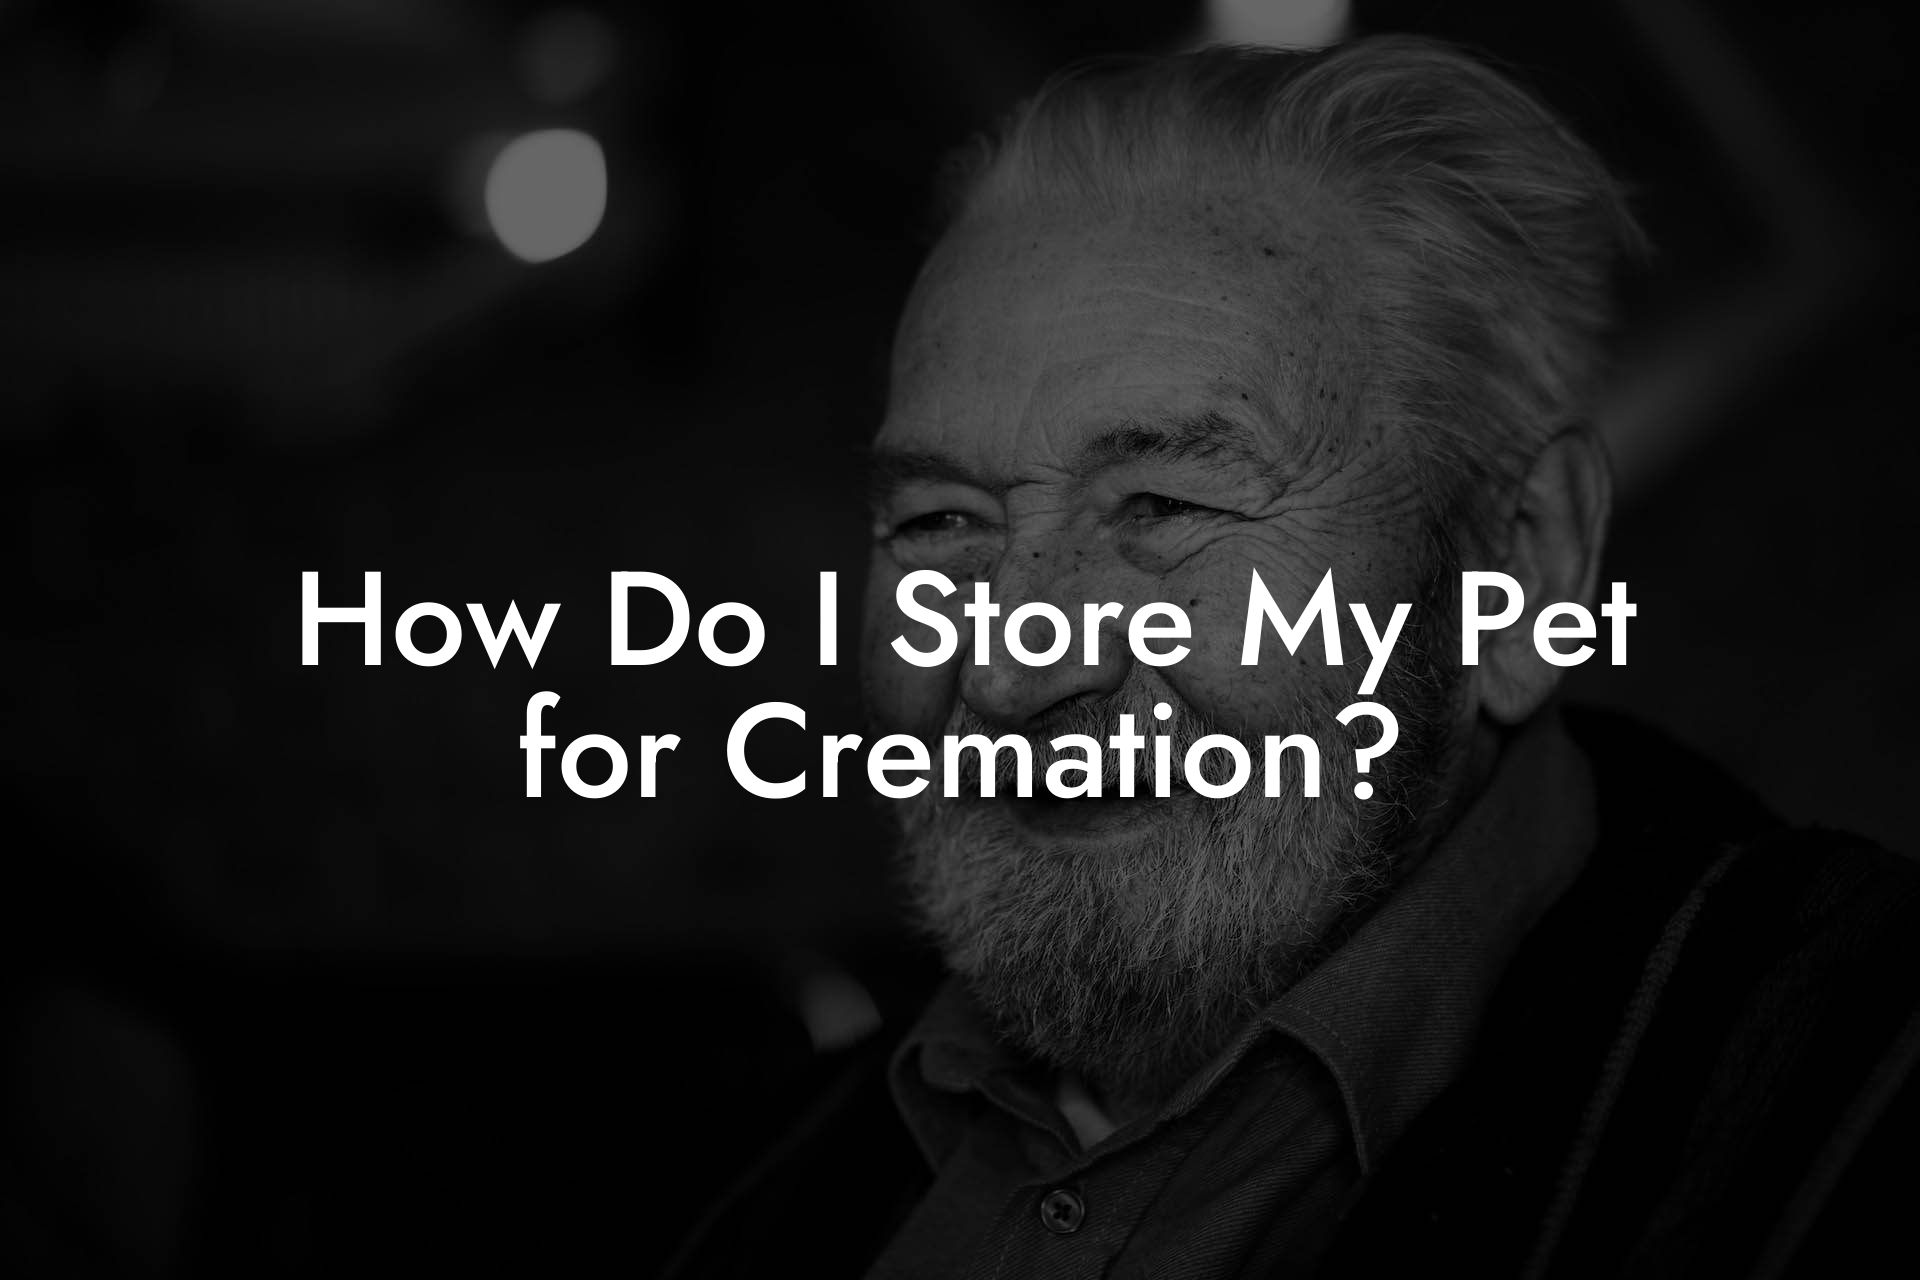 How Do I Store My Pet for Cremation